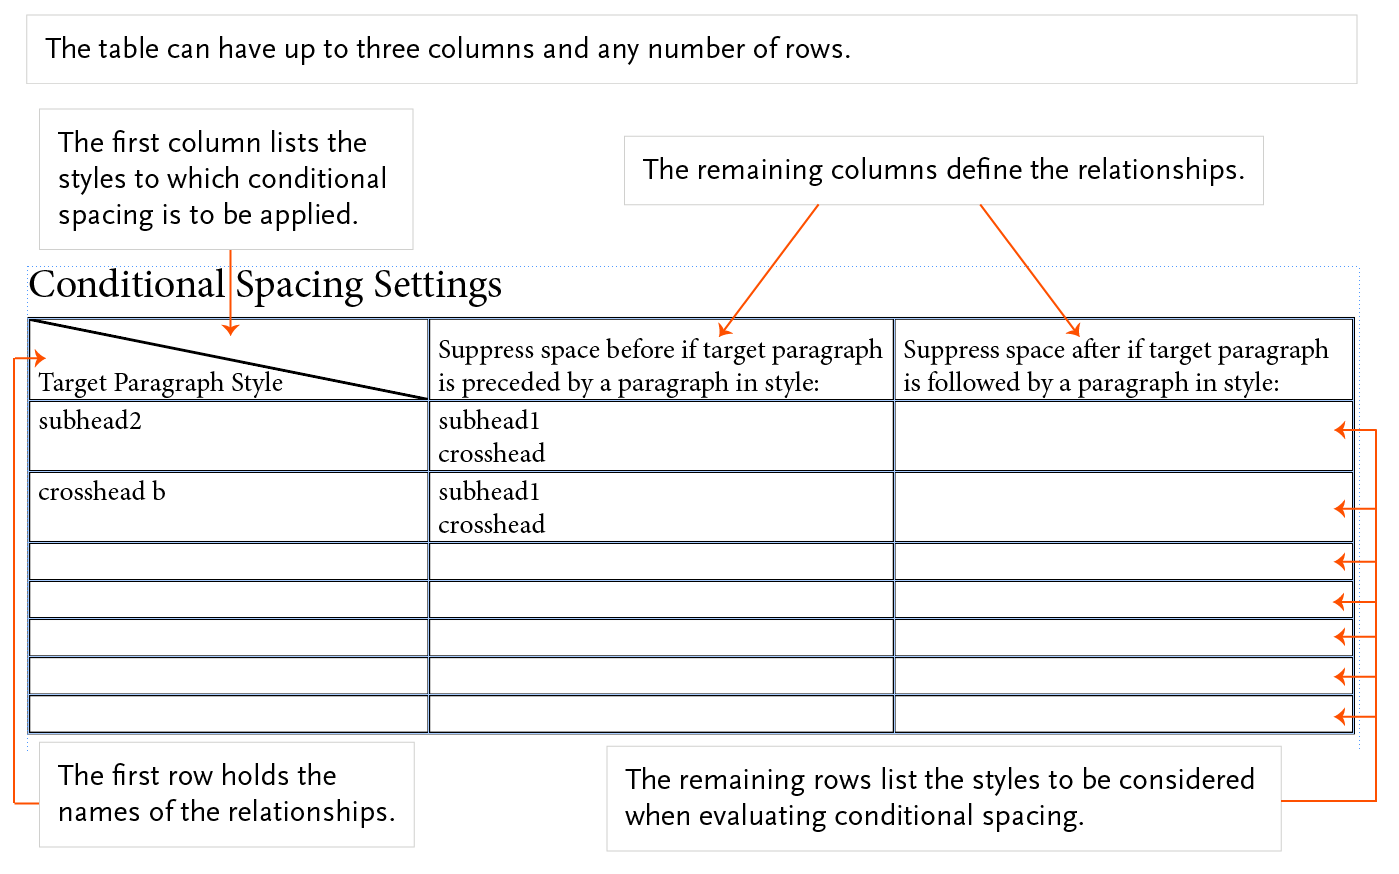 The table can have up to 3 columnds and any number of rows. The first column lists the styles to which conditional spacing is to be applied. The remaining columns define the relationships. The first row holds the names of the relationships. The remaining rows list the styles to be considered when evaluating conditional spacing.